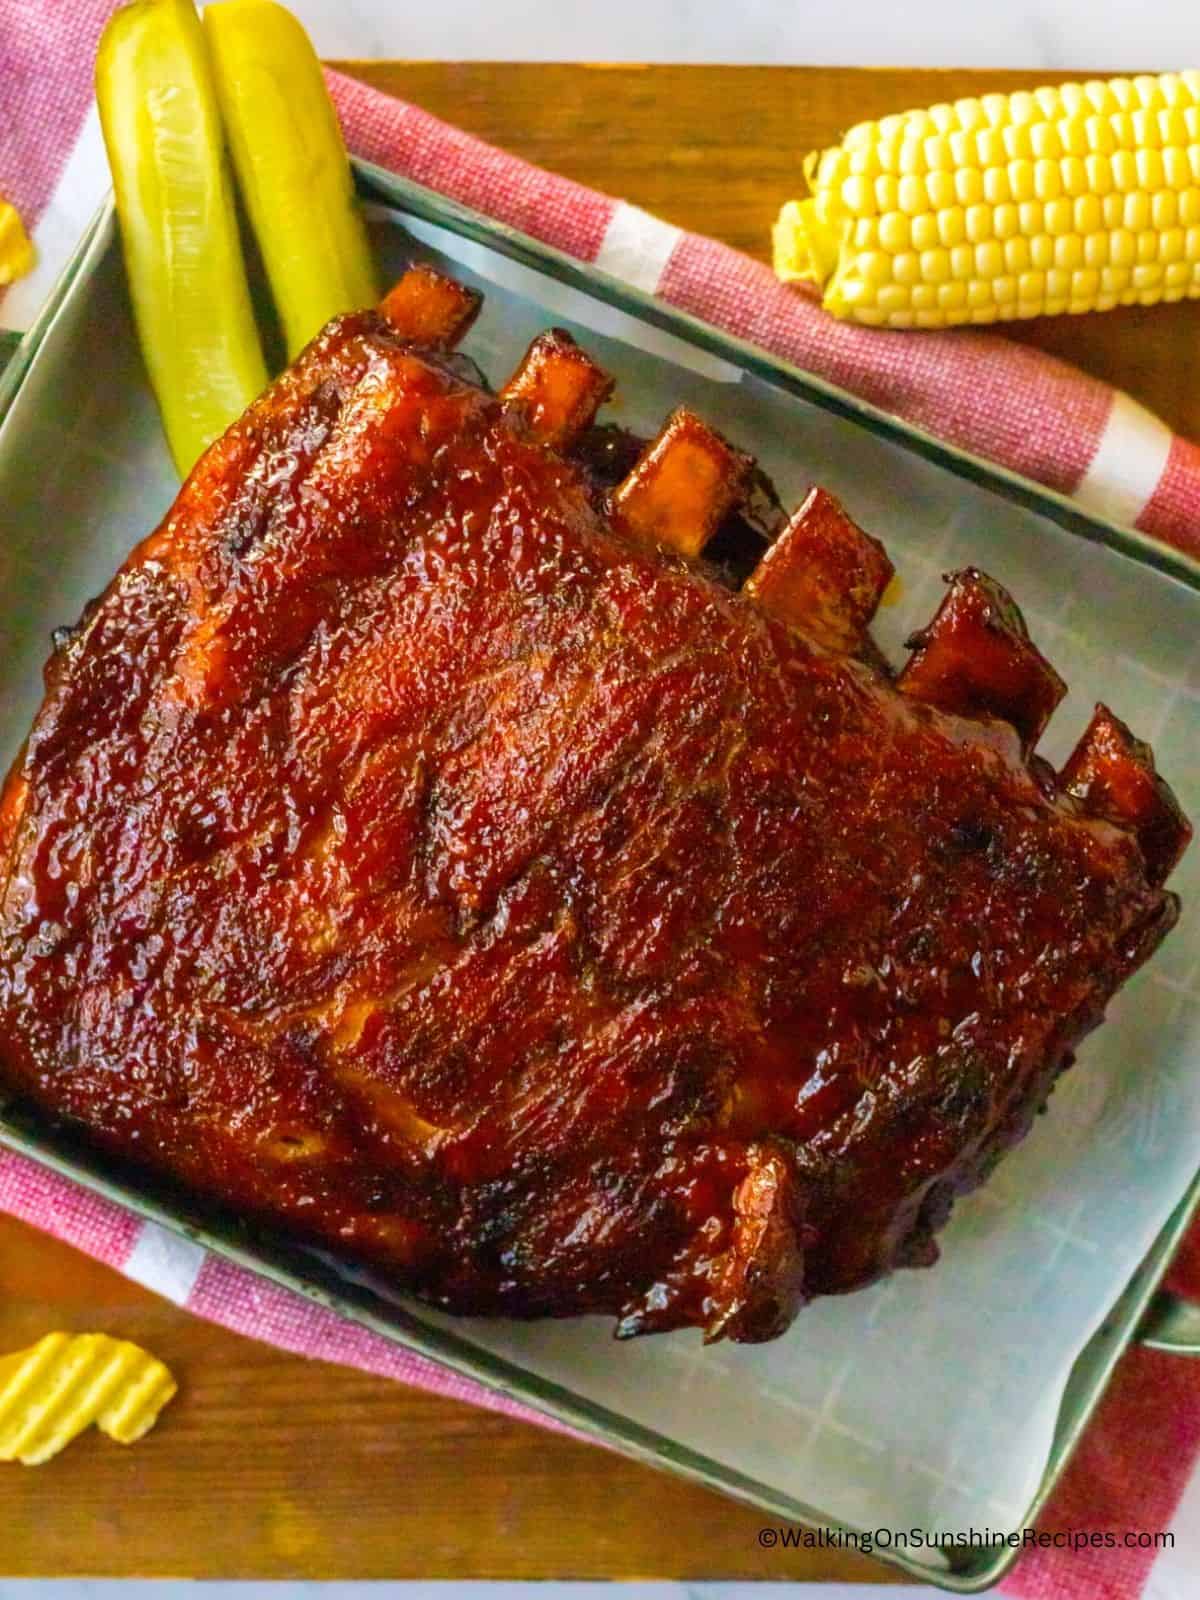 St. Louis ribs cooked to perfection.